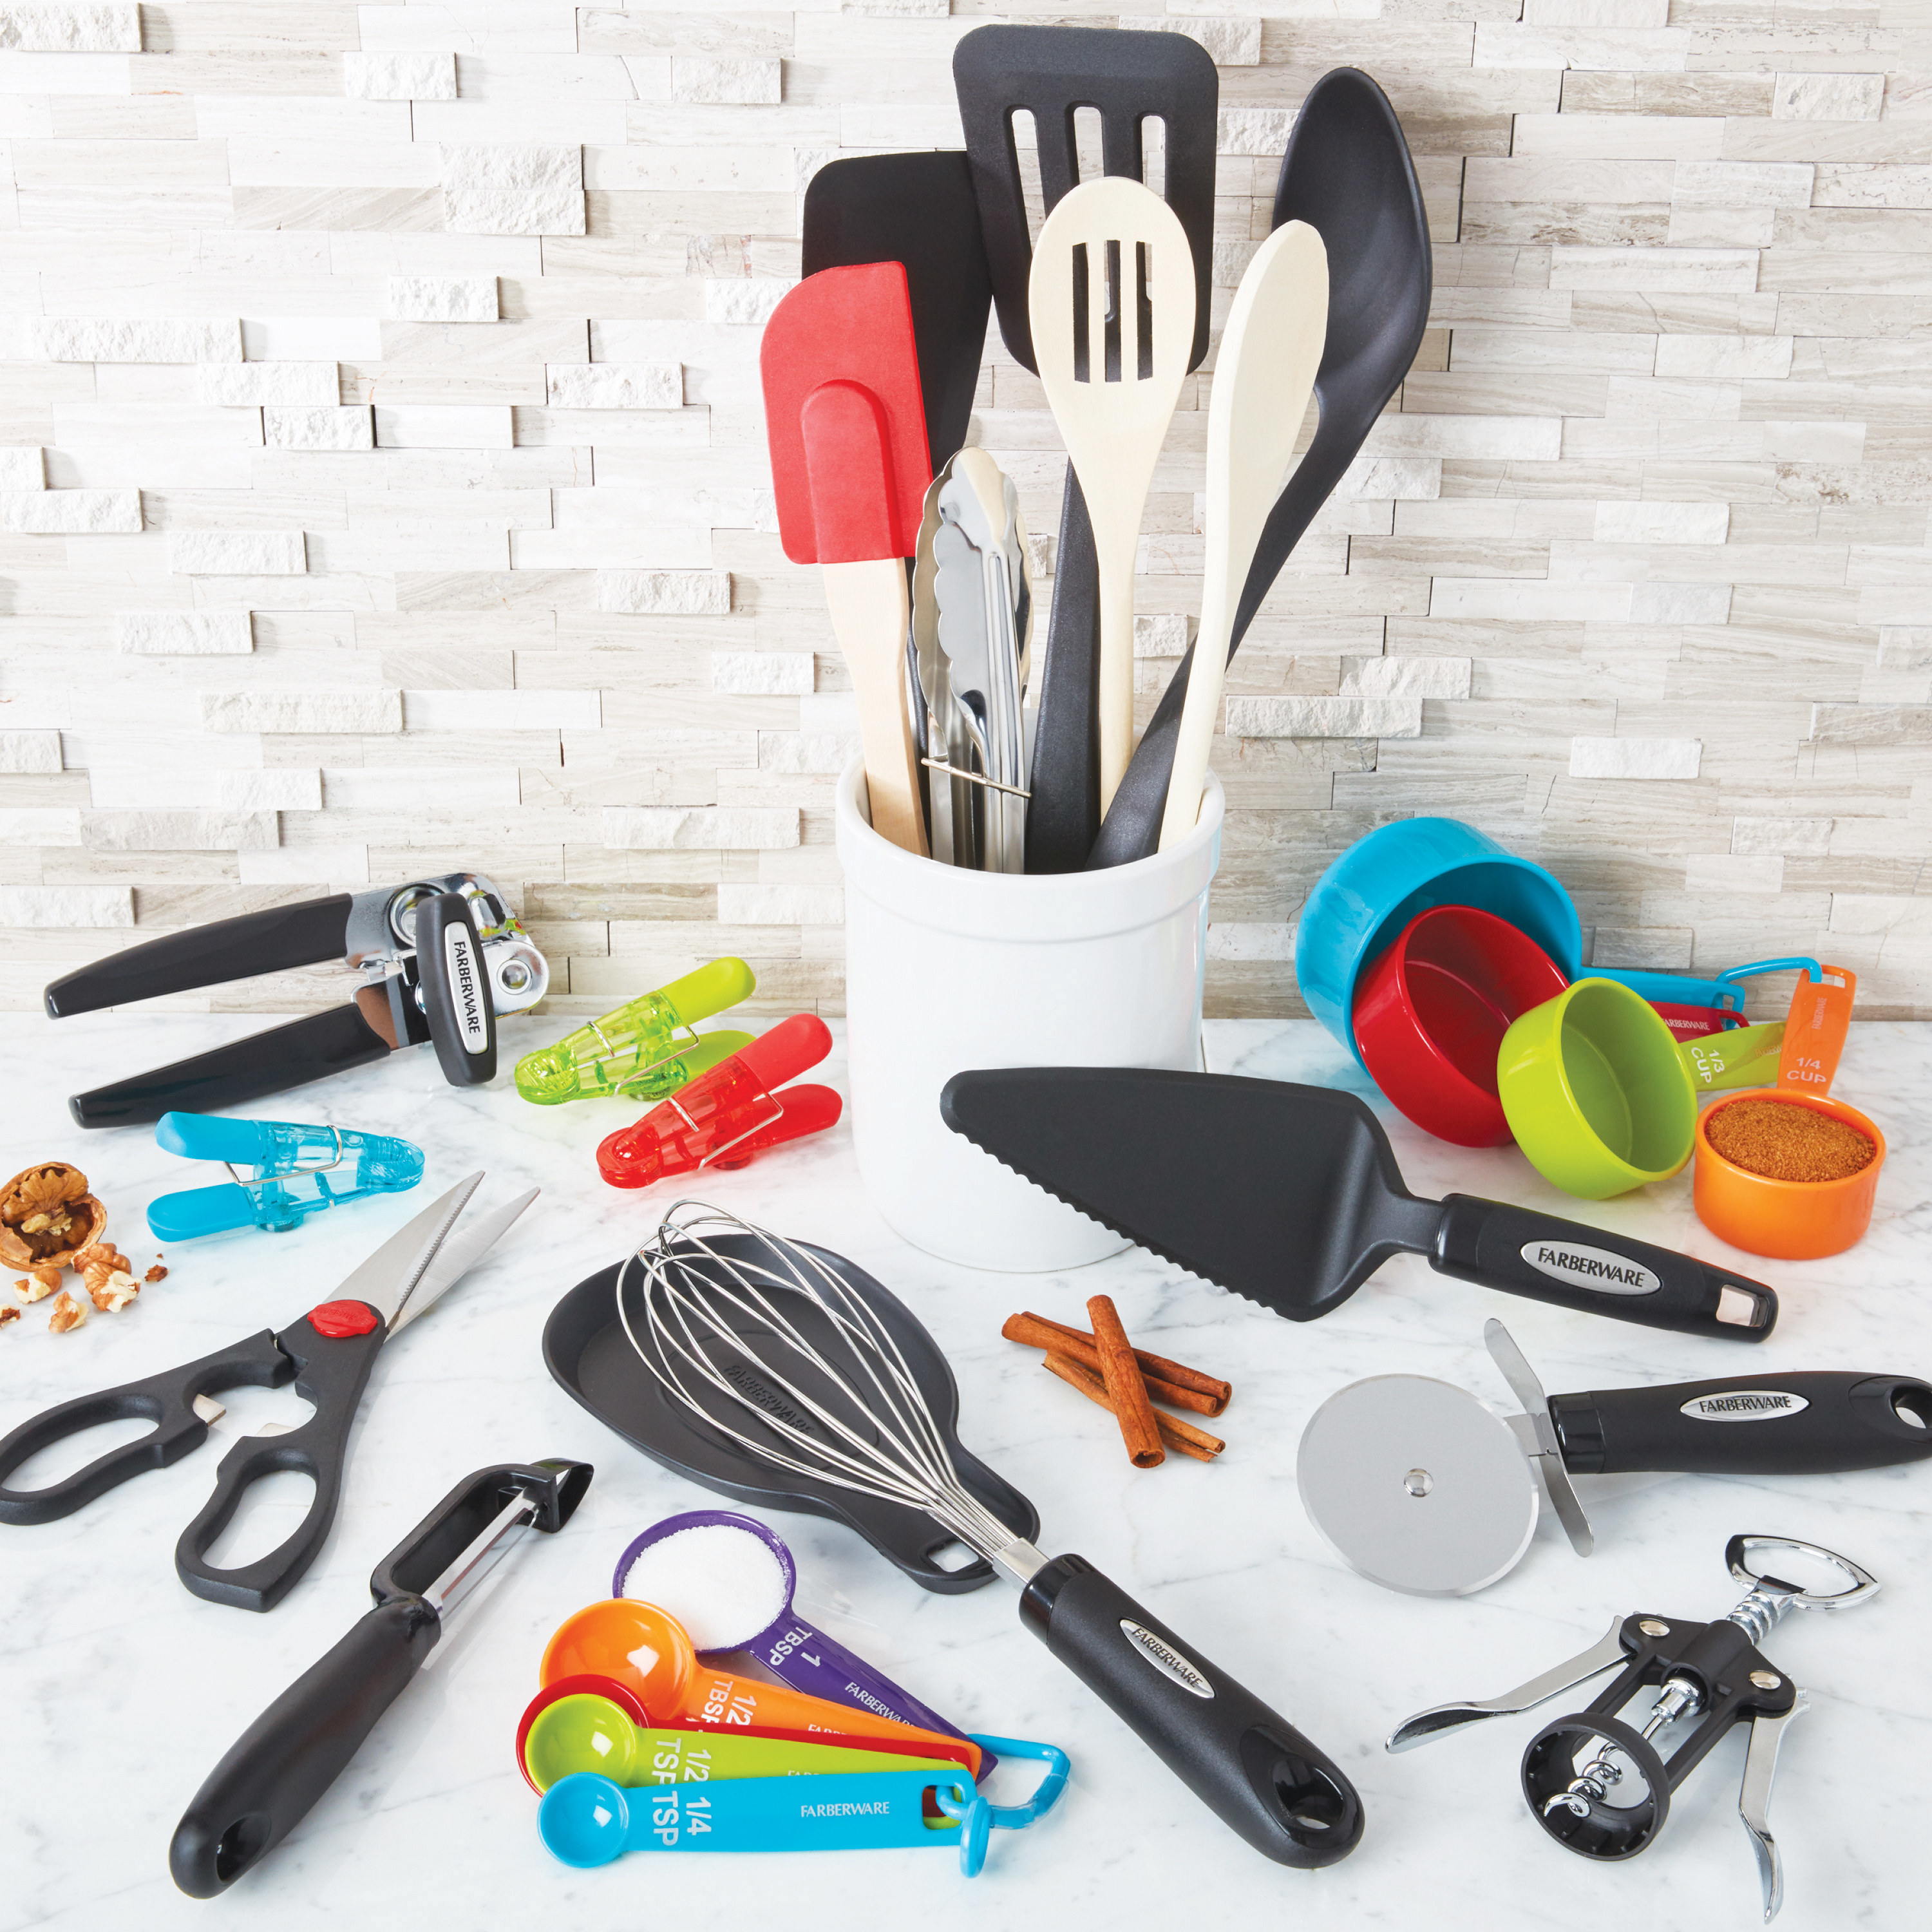 28 pieces of kitchen utensils and gadgets on a kitchen counter